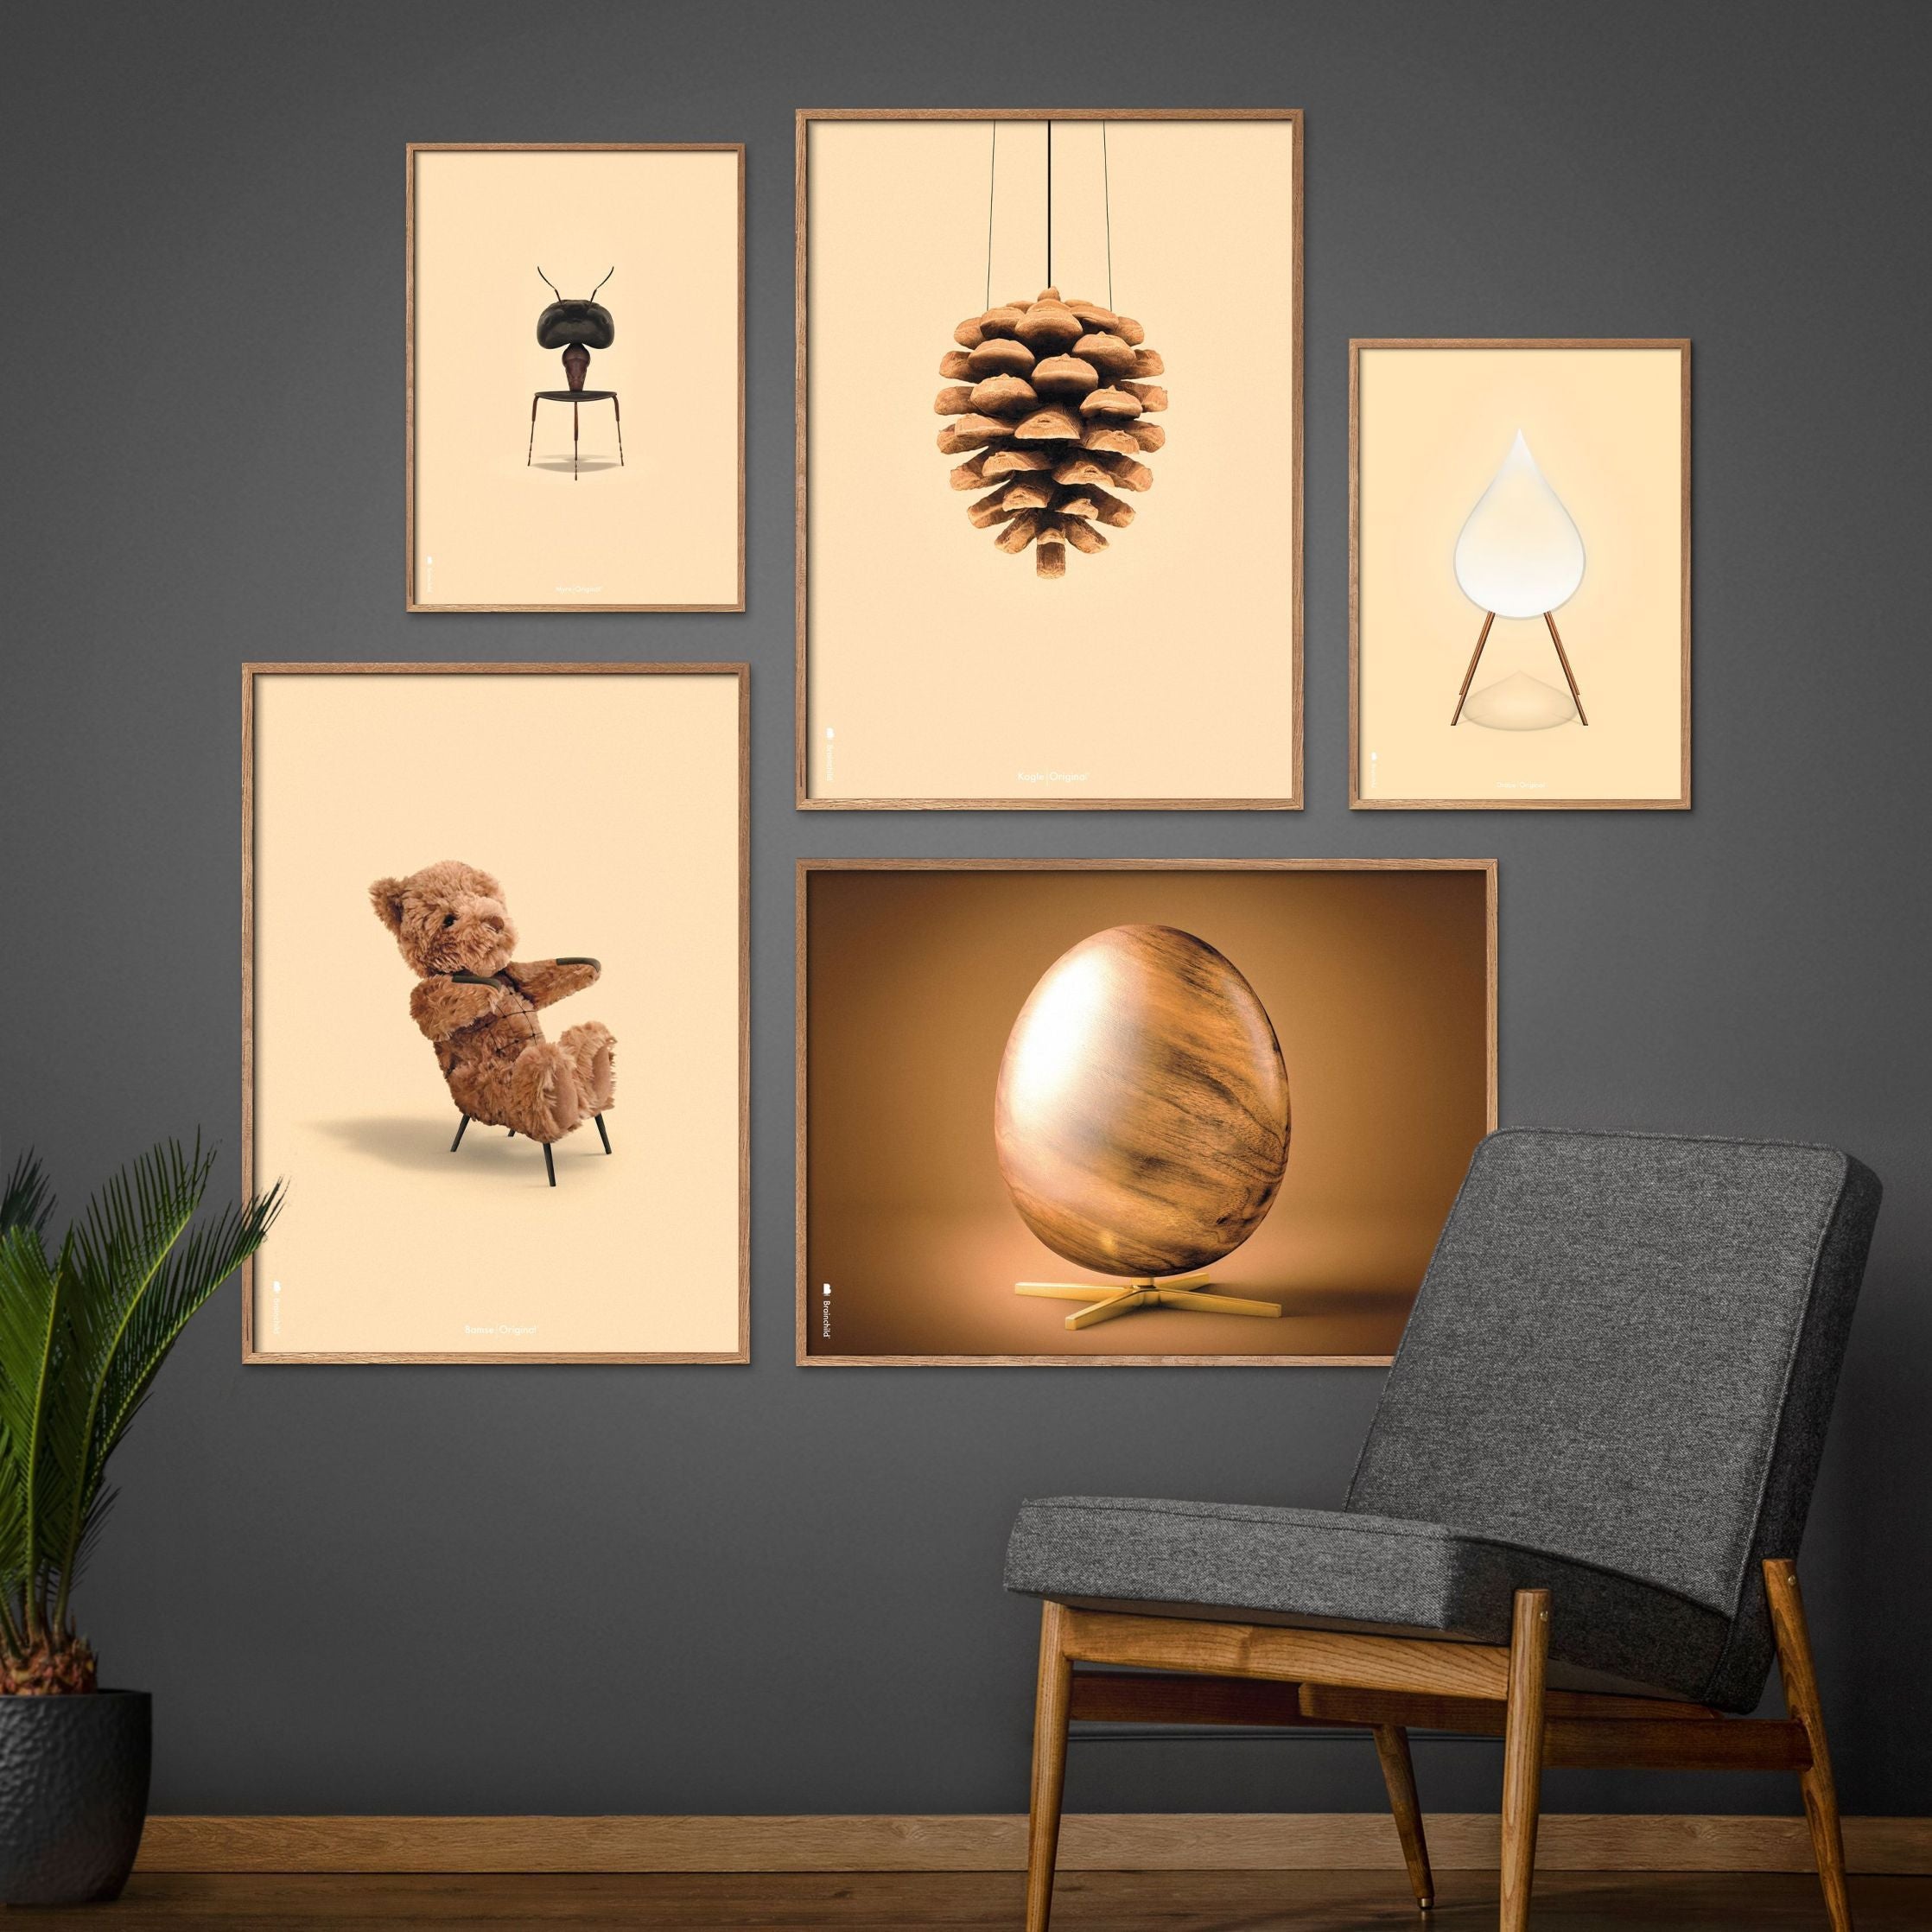 Brainchild Ant Classic Poster, Brass Frame 50x70 Cm, Sand Colored Background